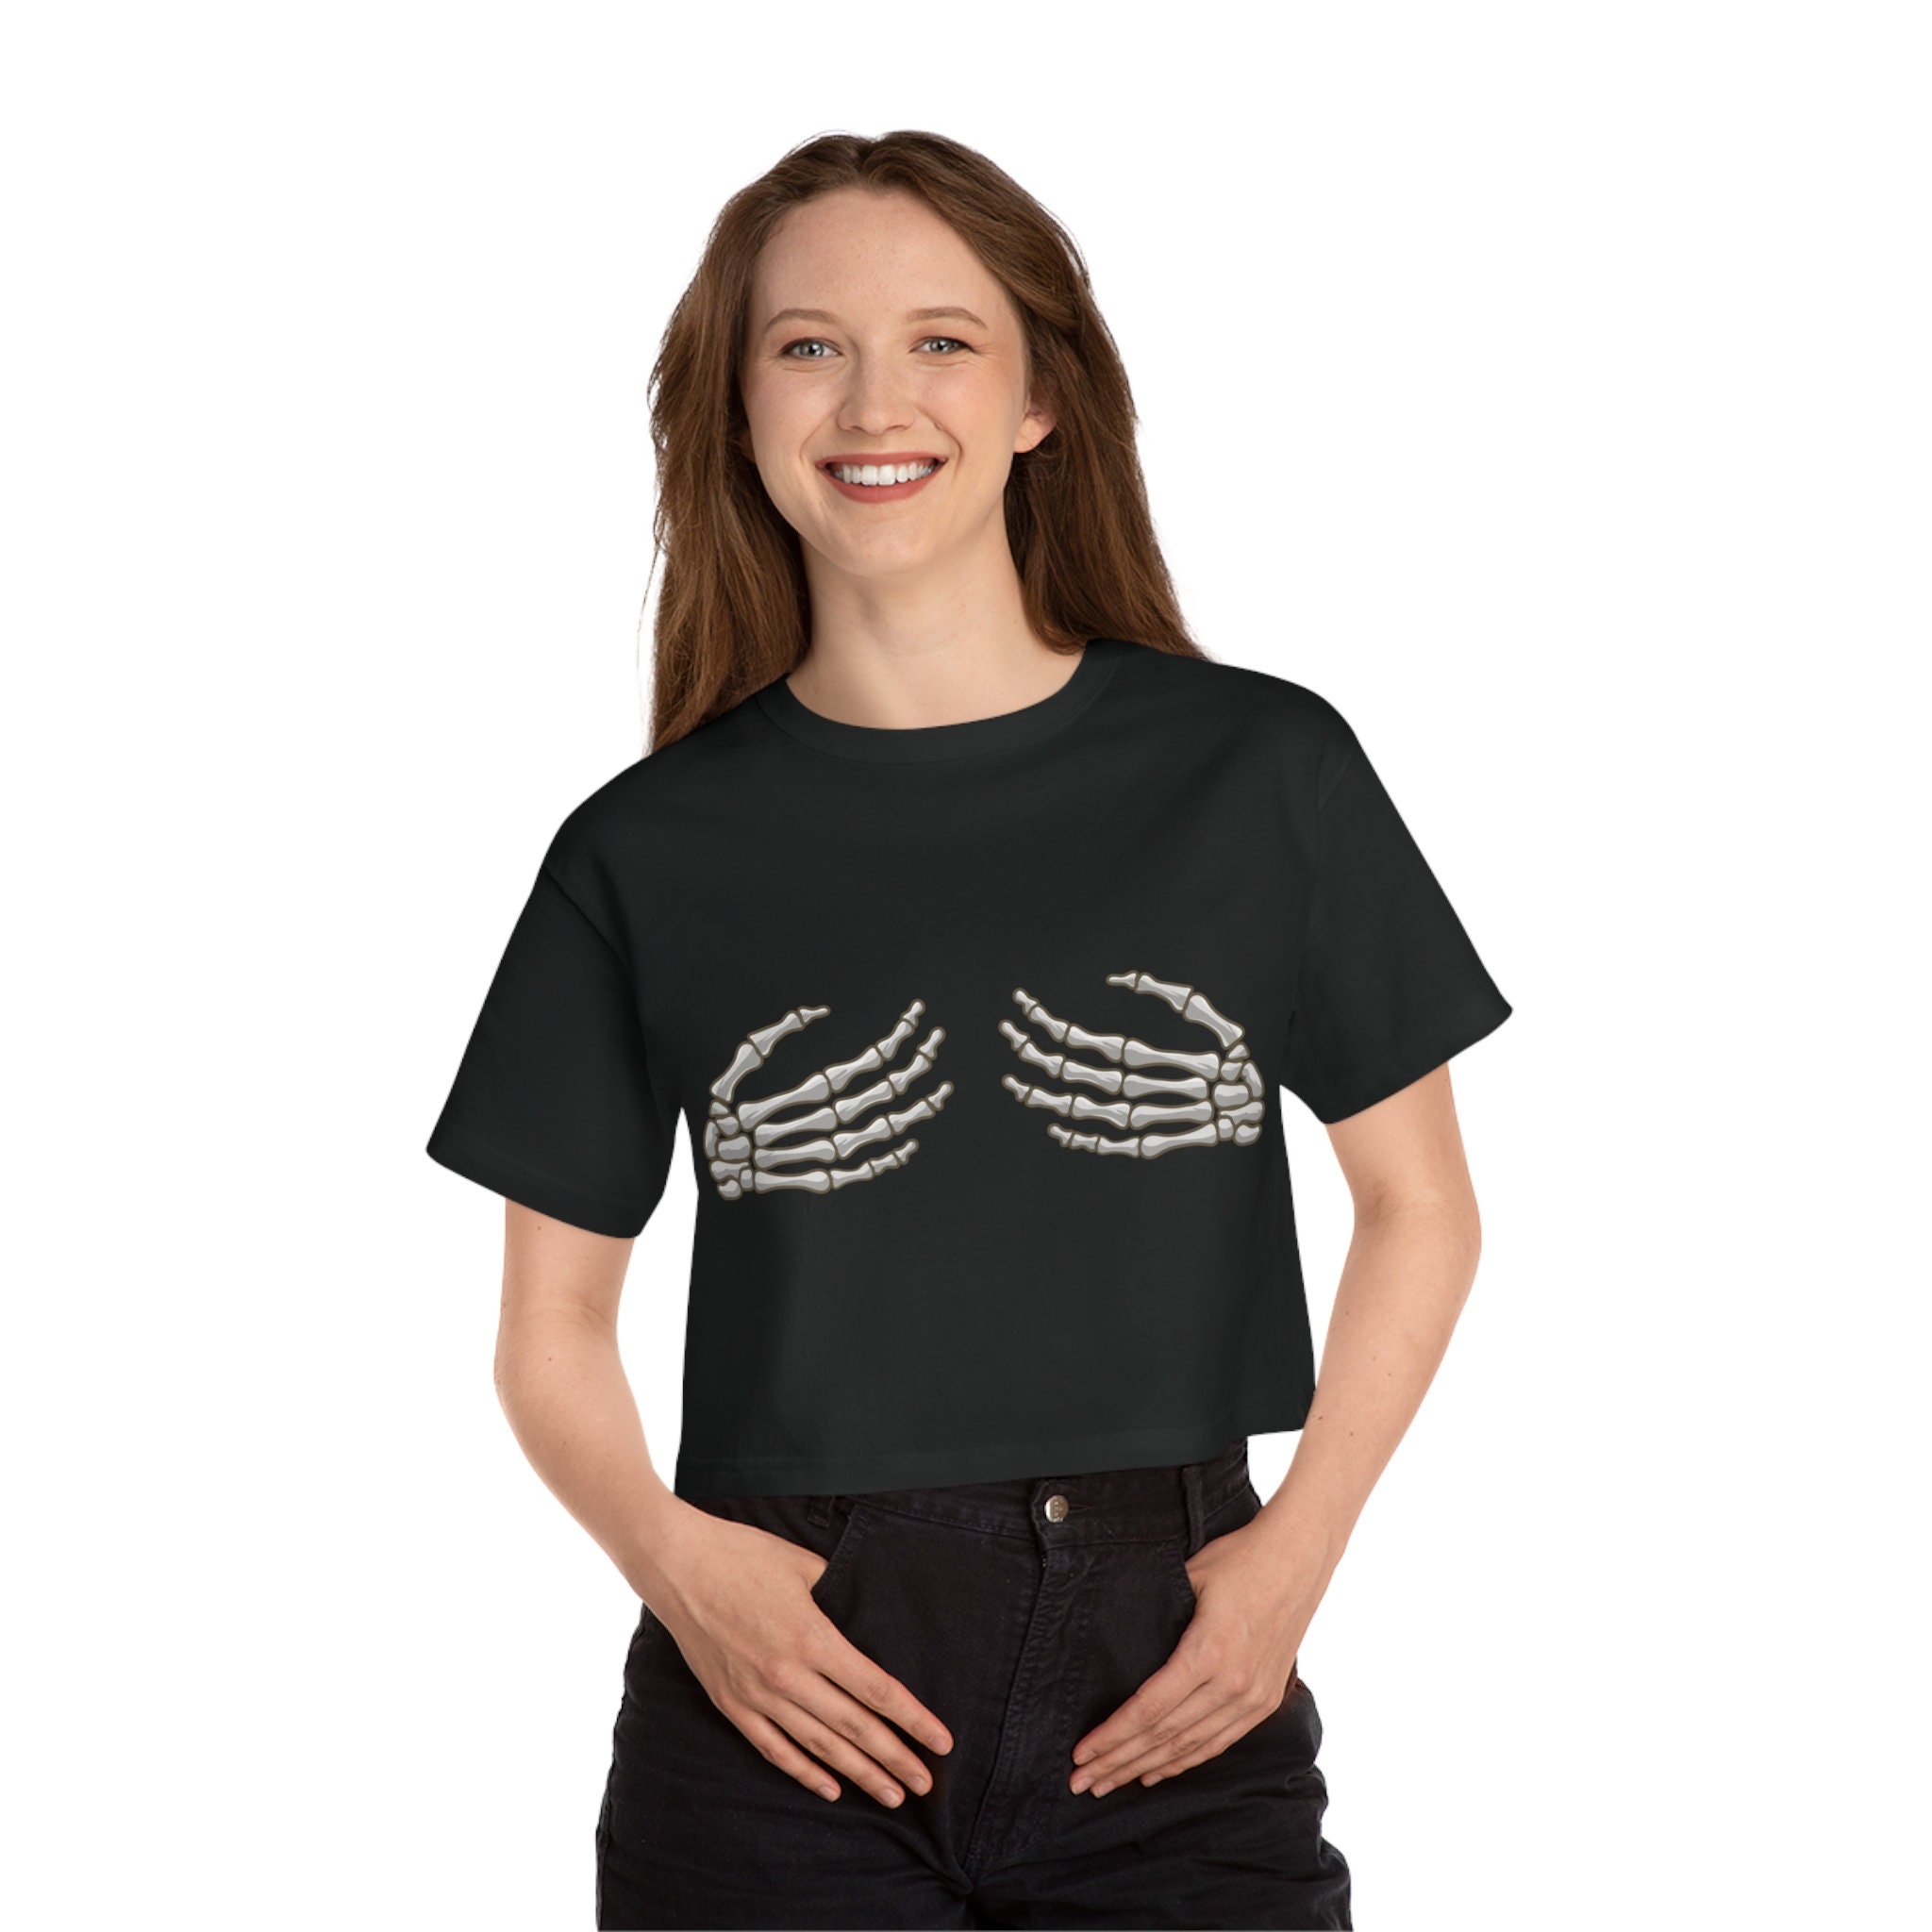 Discover Skeleton Hands Shirt, CHAMPION CROP TEE, Halloween Shirt, Halloween Skeleton, Champion Women's Heritage Cropped T-Shirt